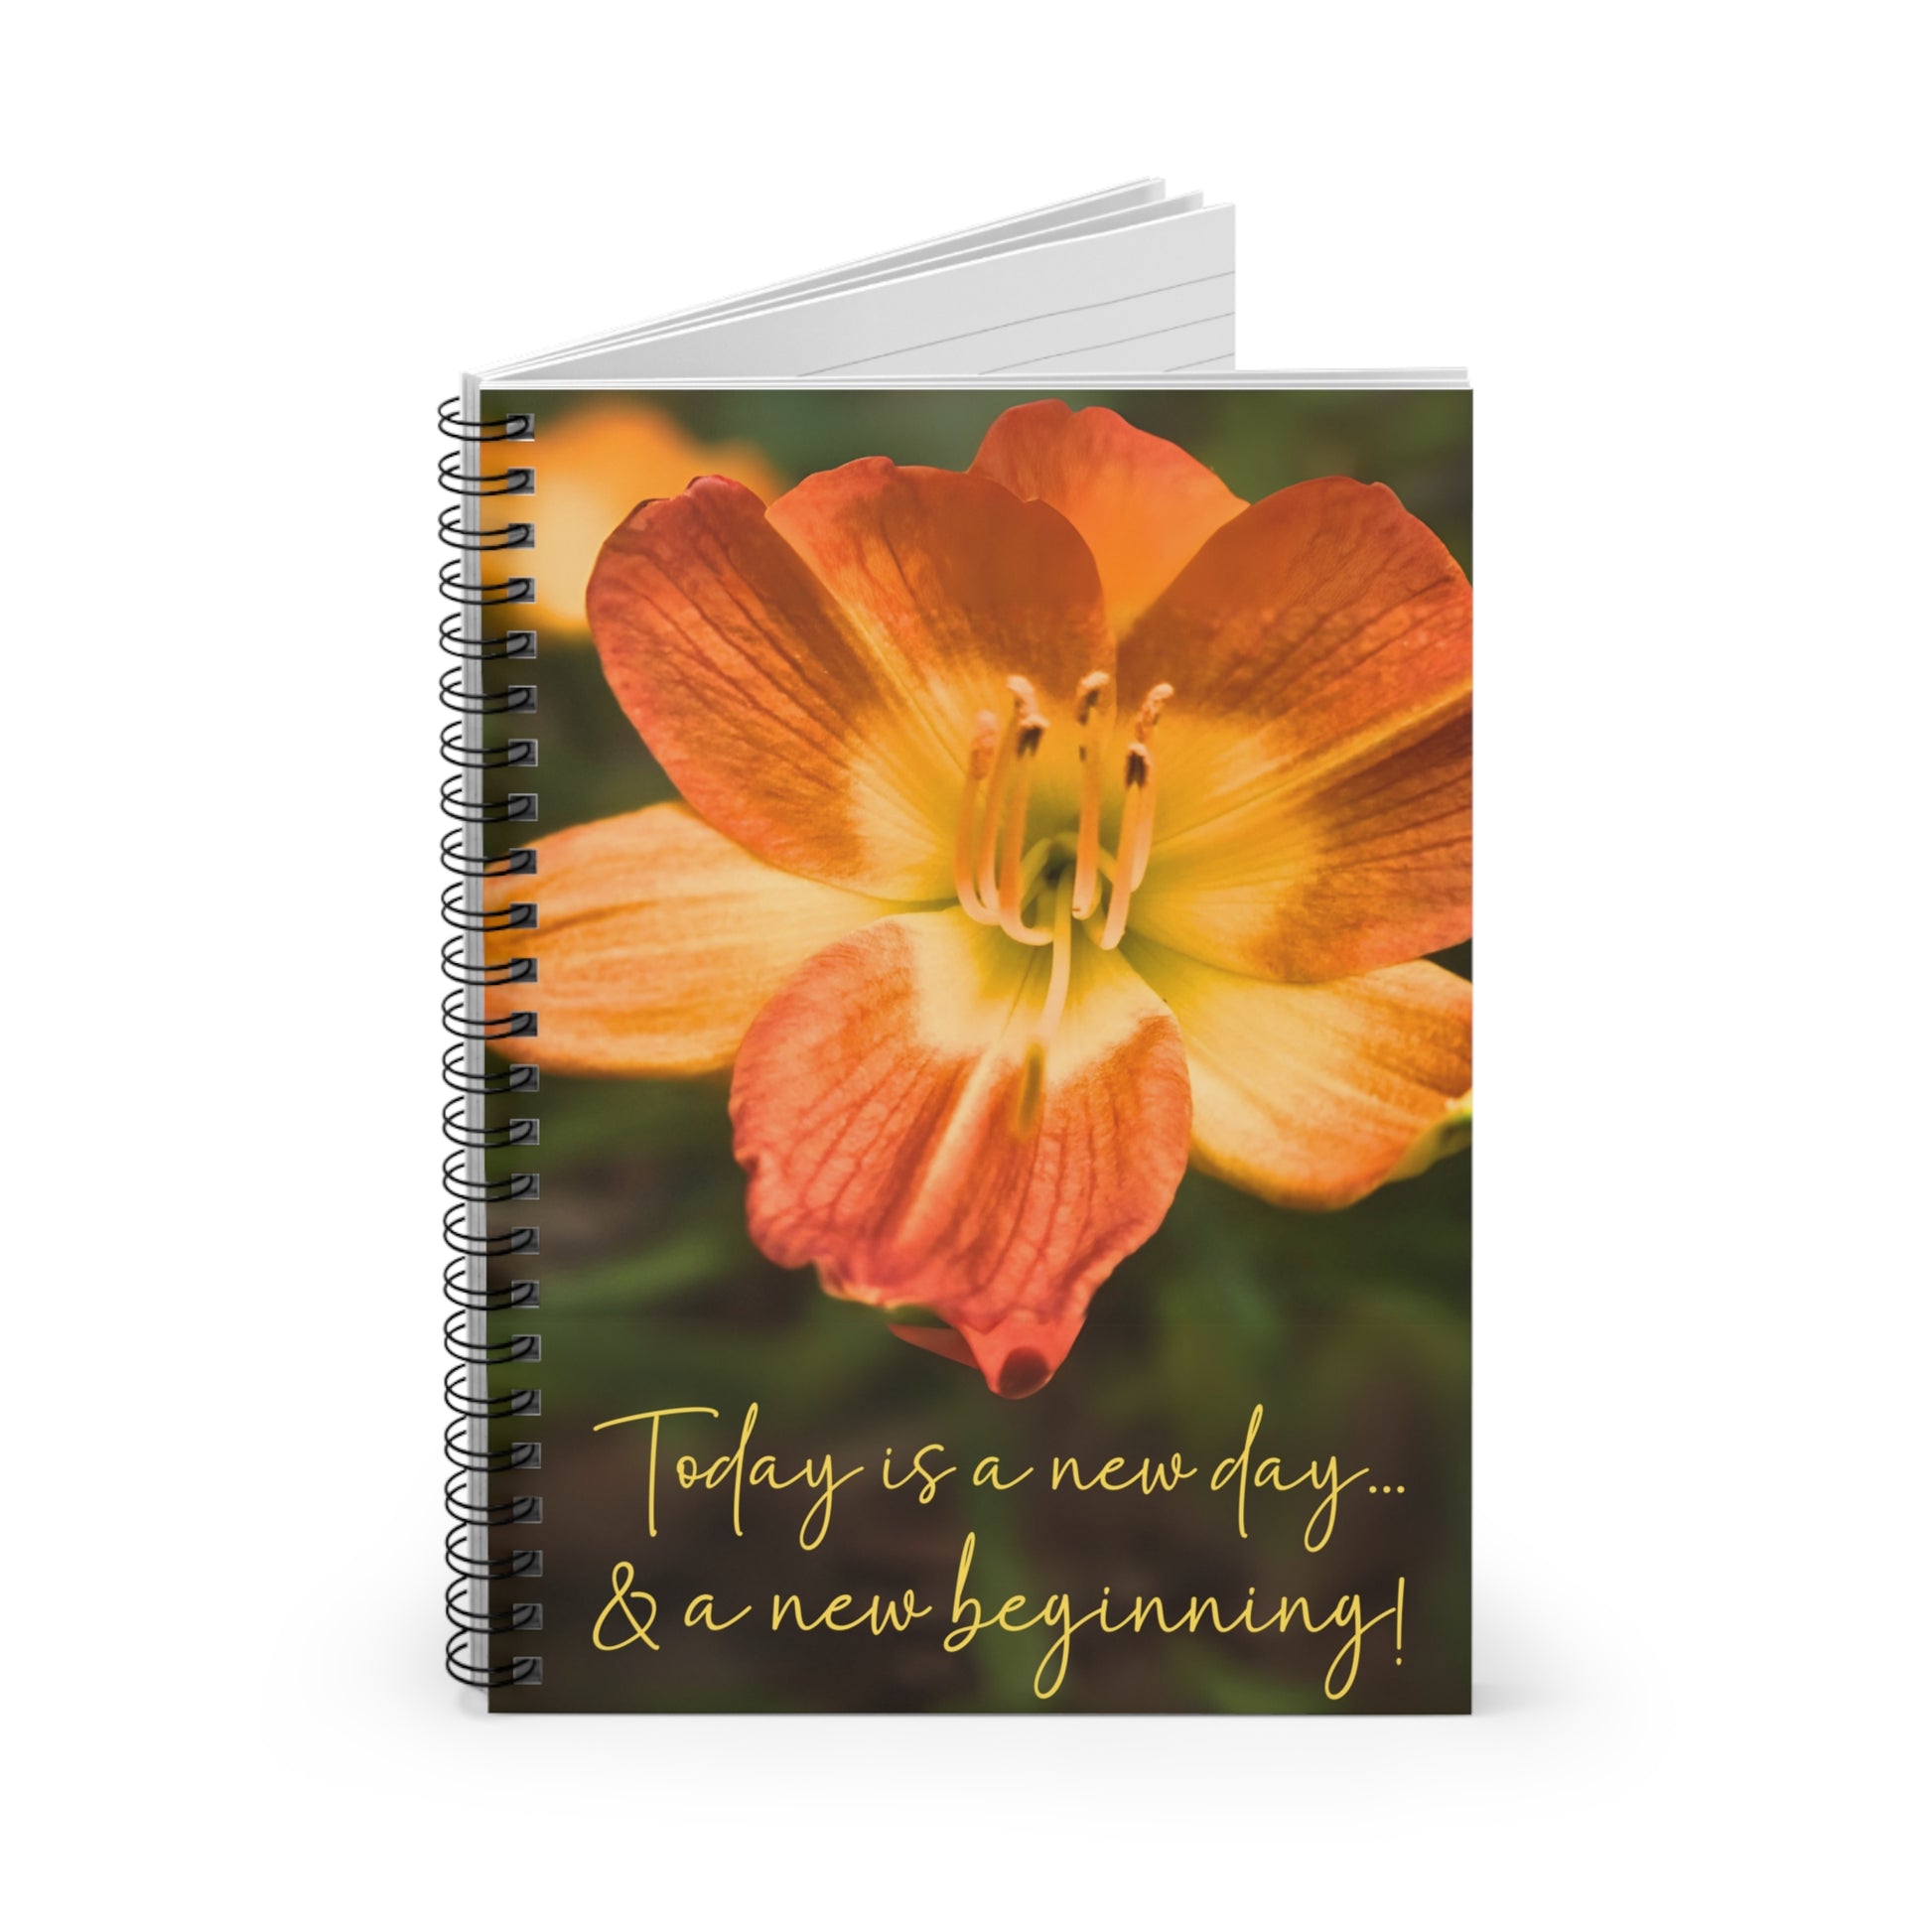 Positivity notebook for well-being for gift or self, open view.